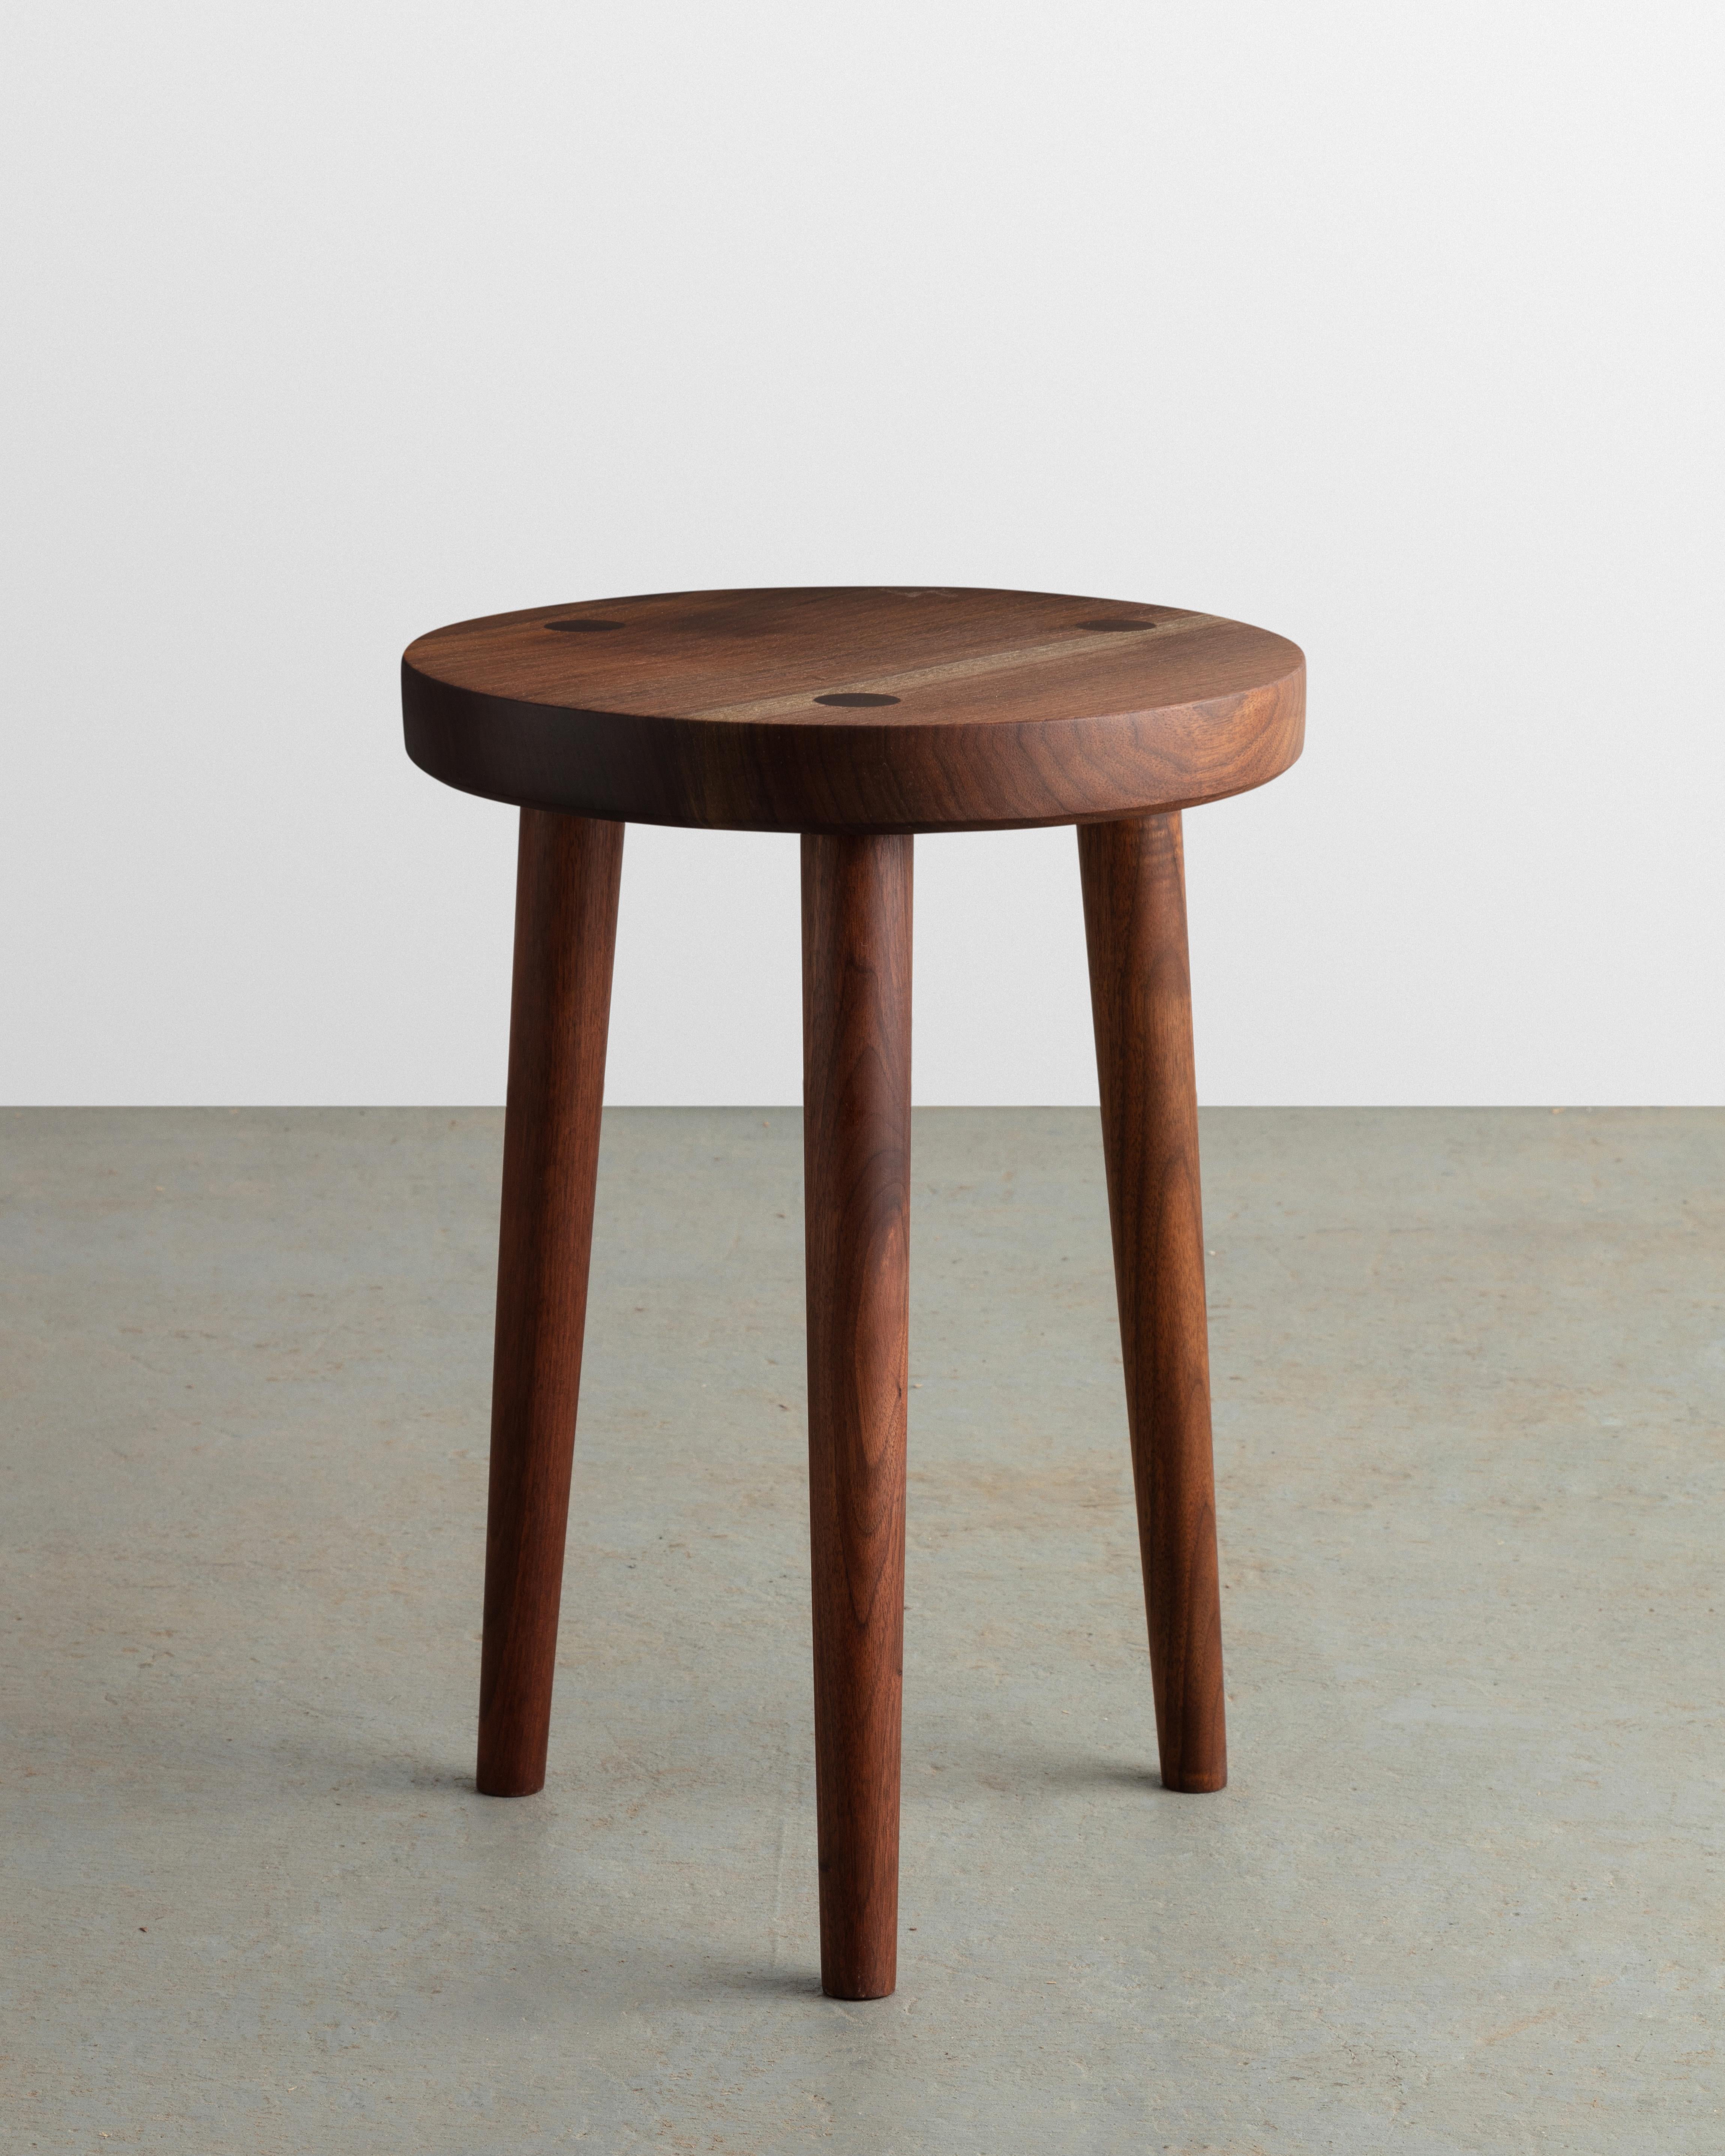 Constructed from solid walnut, this hand-turned three-legged stool is built to last. All pieces are made to order and no two are alike.